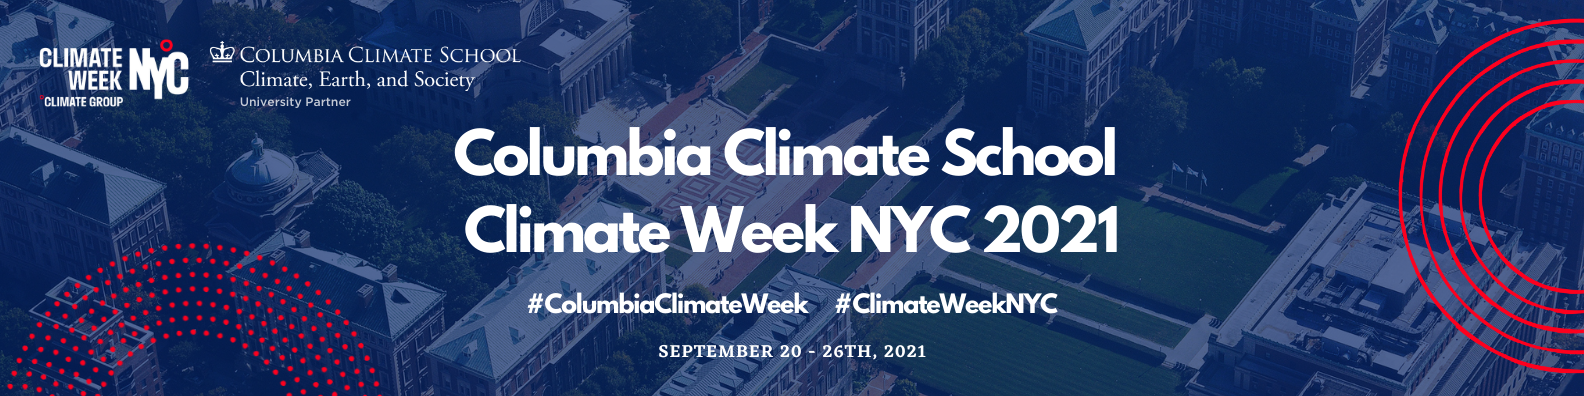 climate week banner graphic